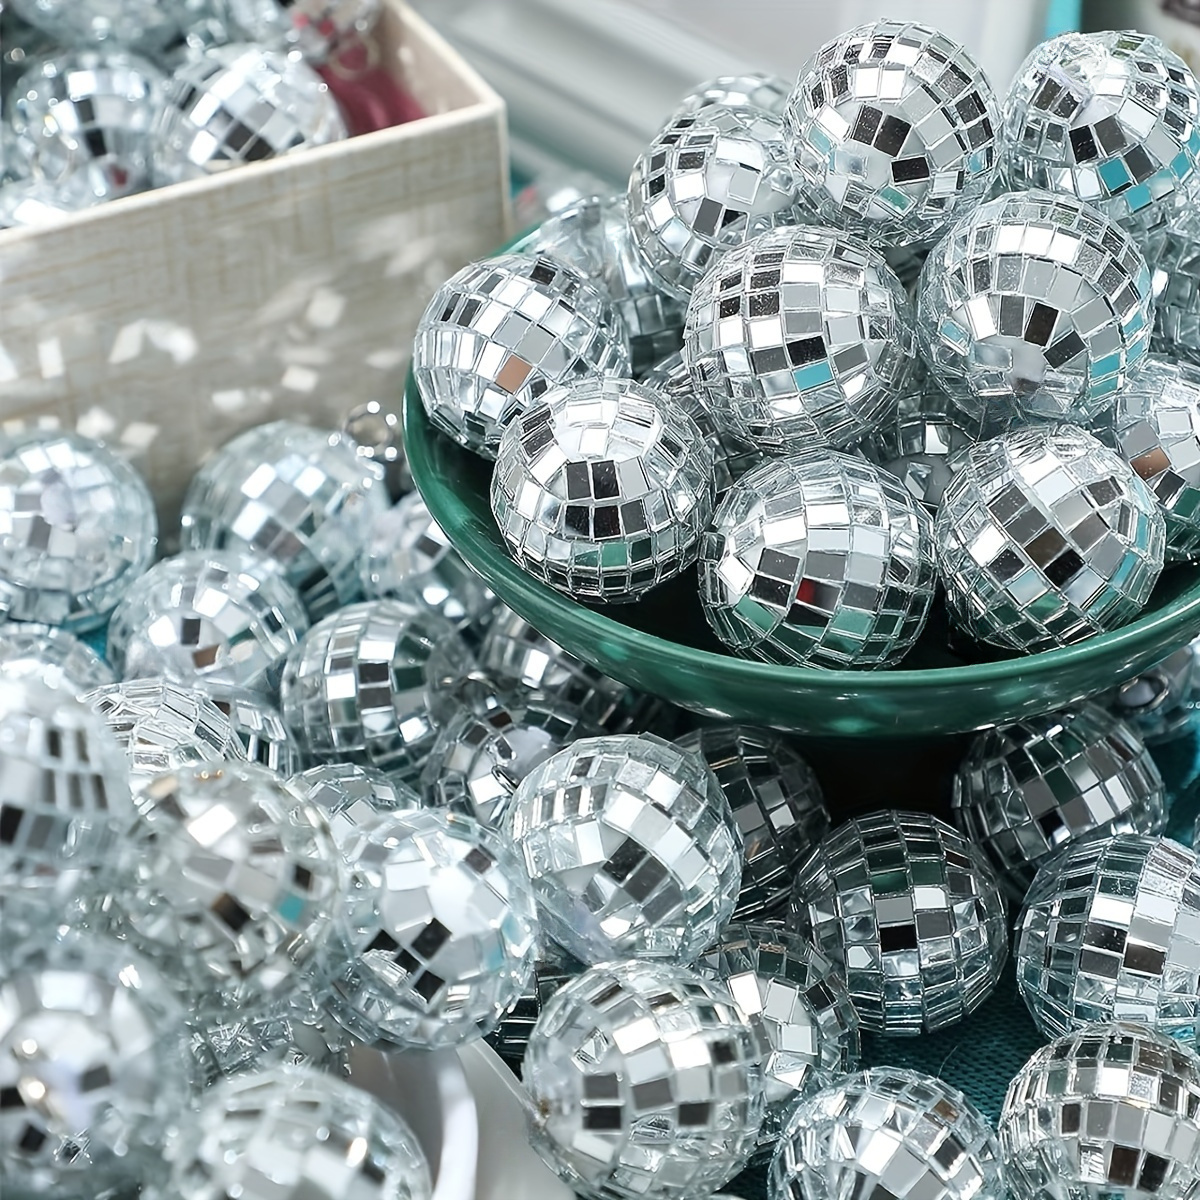 Mirror Disco Ball Silver Hanging Reflective Disco Ball Stage Party Decor 12  inch